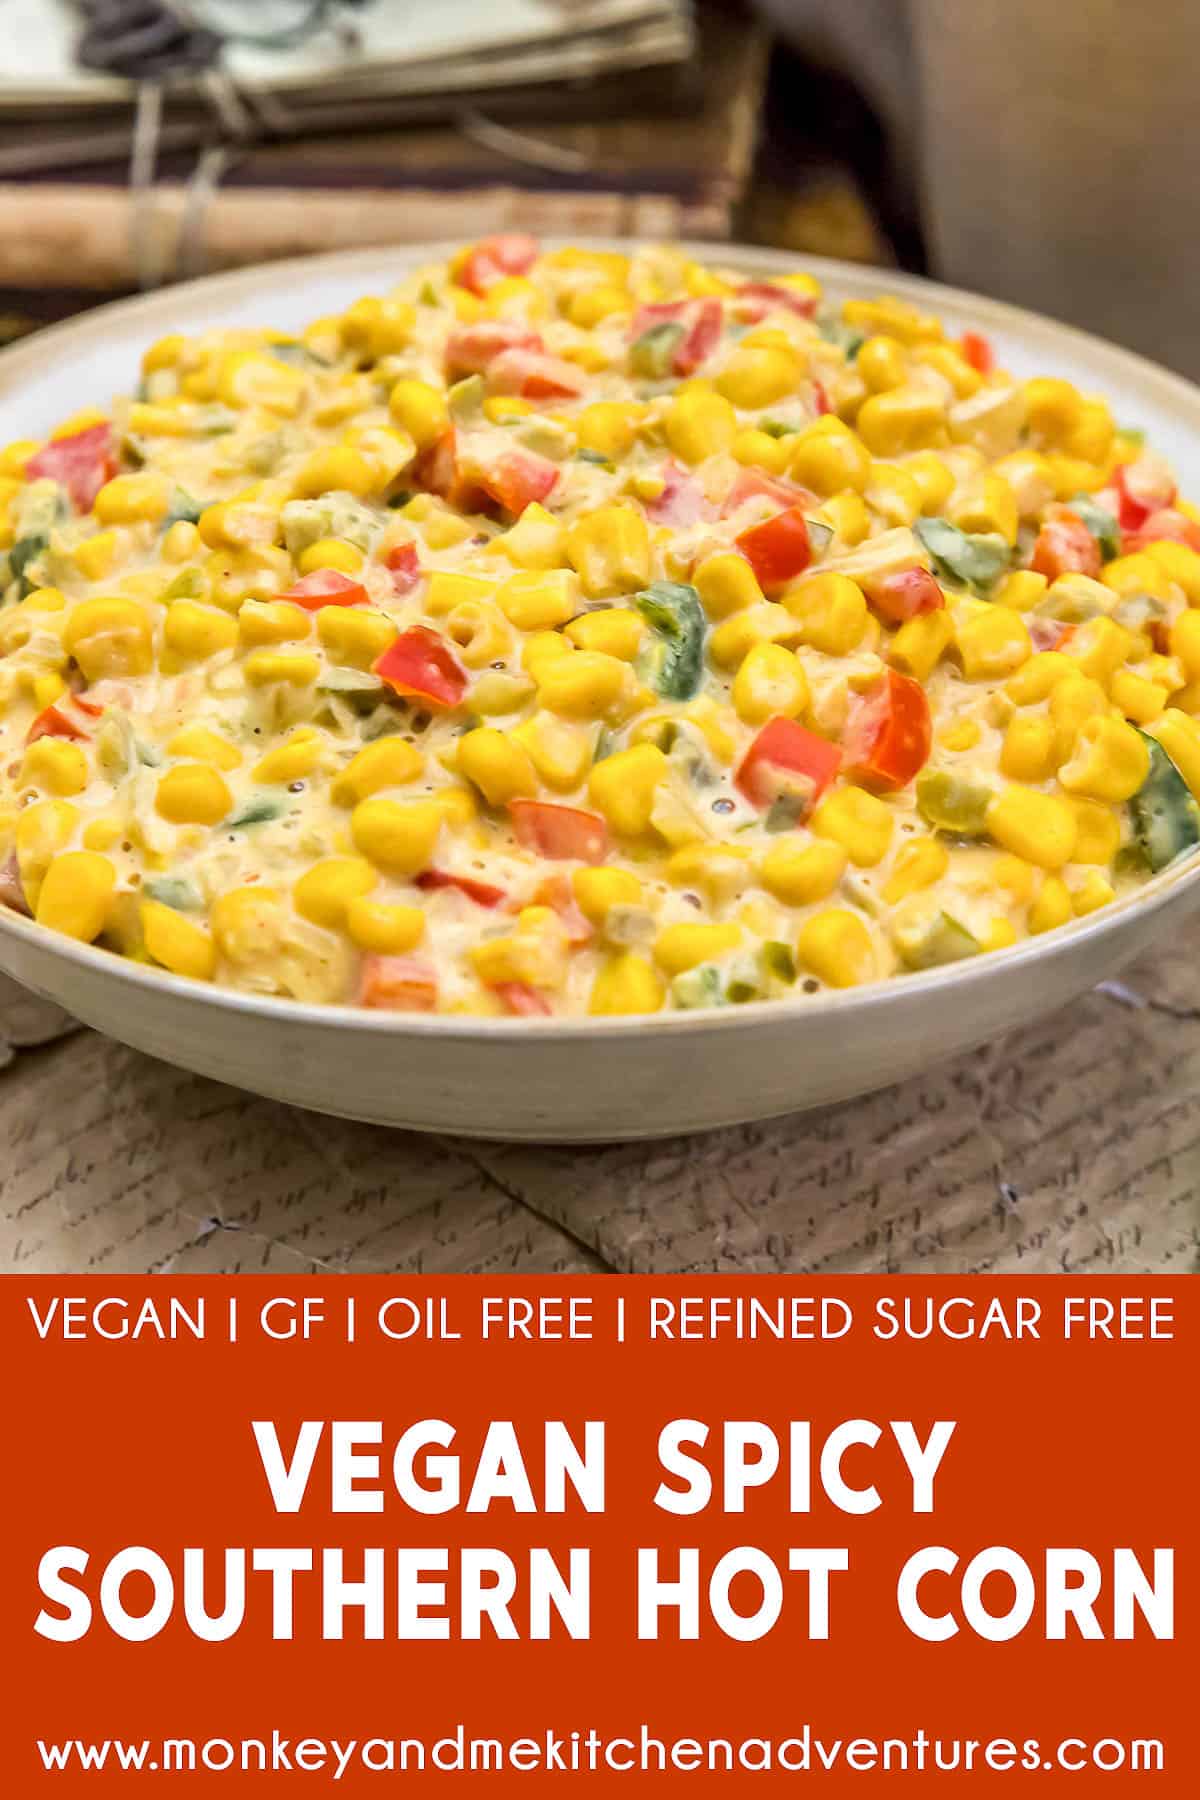 Vegan Spicy Southern Hot Corn with Text Description